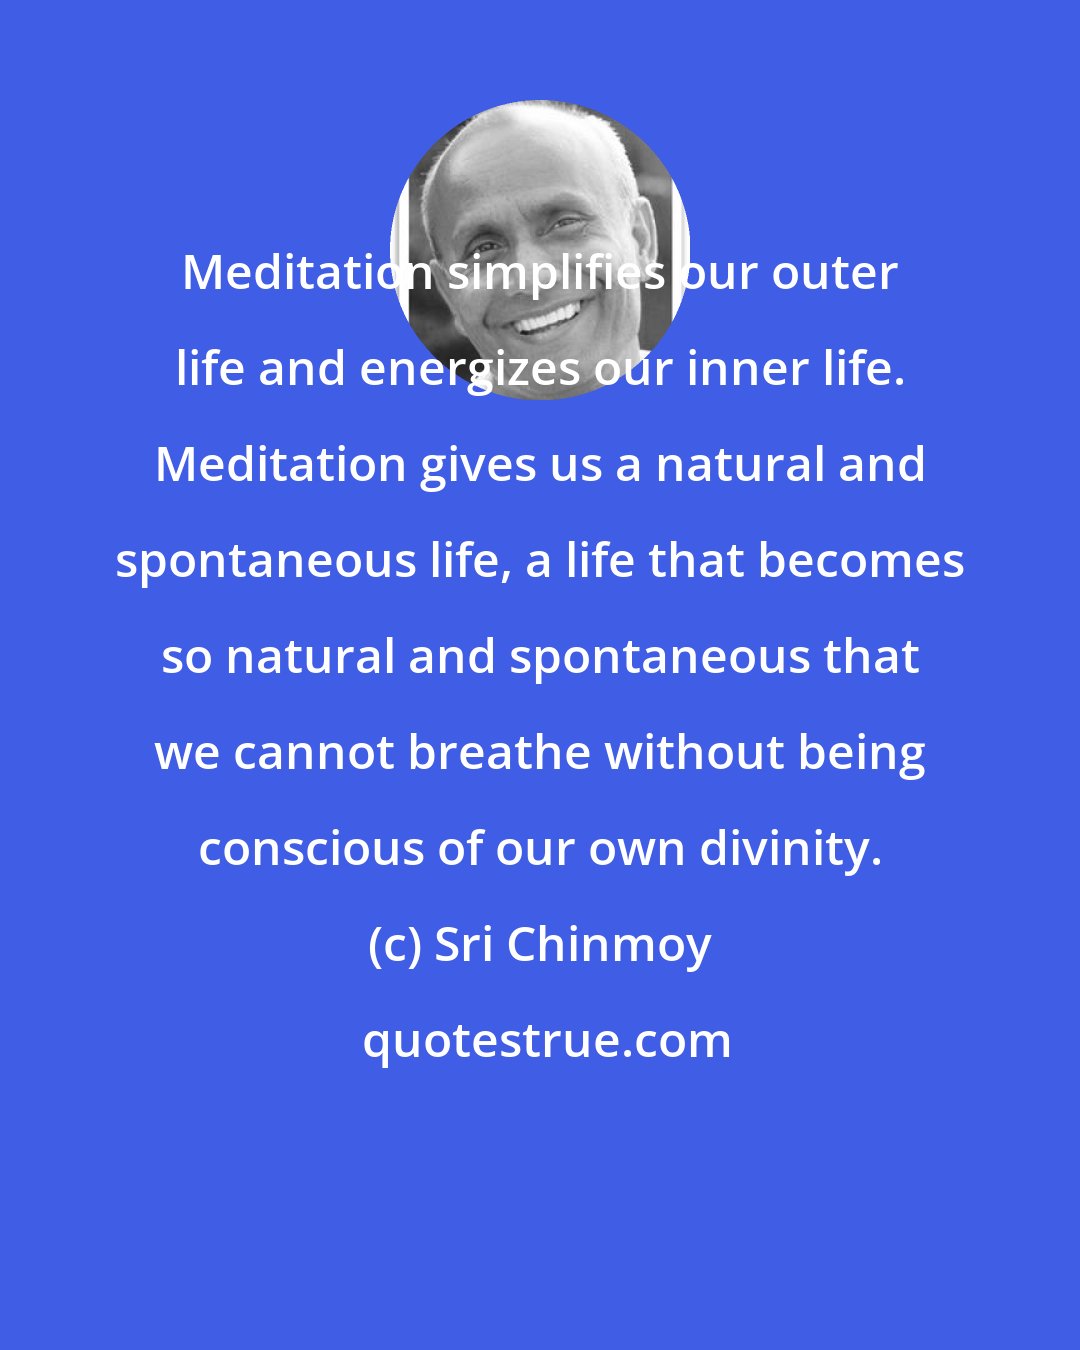 Sri Chinmoy: Meditation simplifies our outer life and energizes our inner life. Meditation gives us a natural and spontaneous life, a life that becomes so natural and spontaneous that we cannot breathe without being conscious of our own divinity.